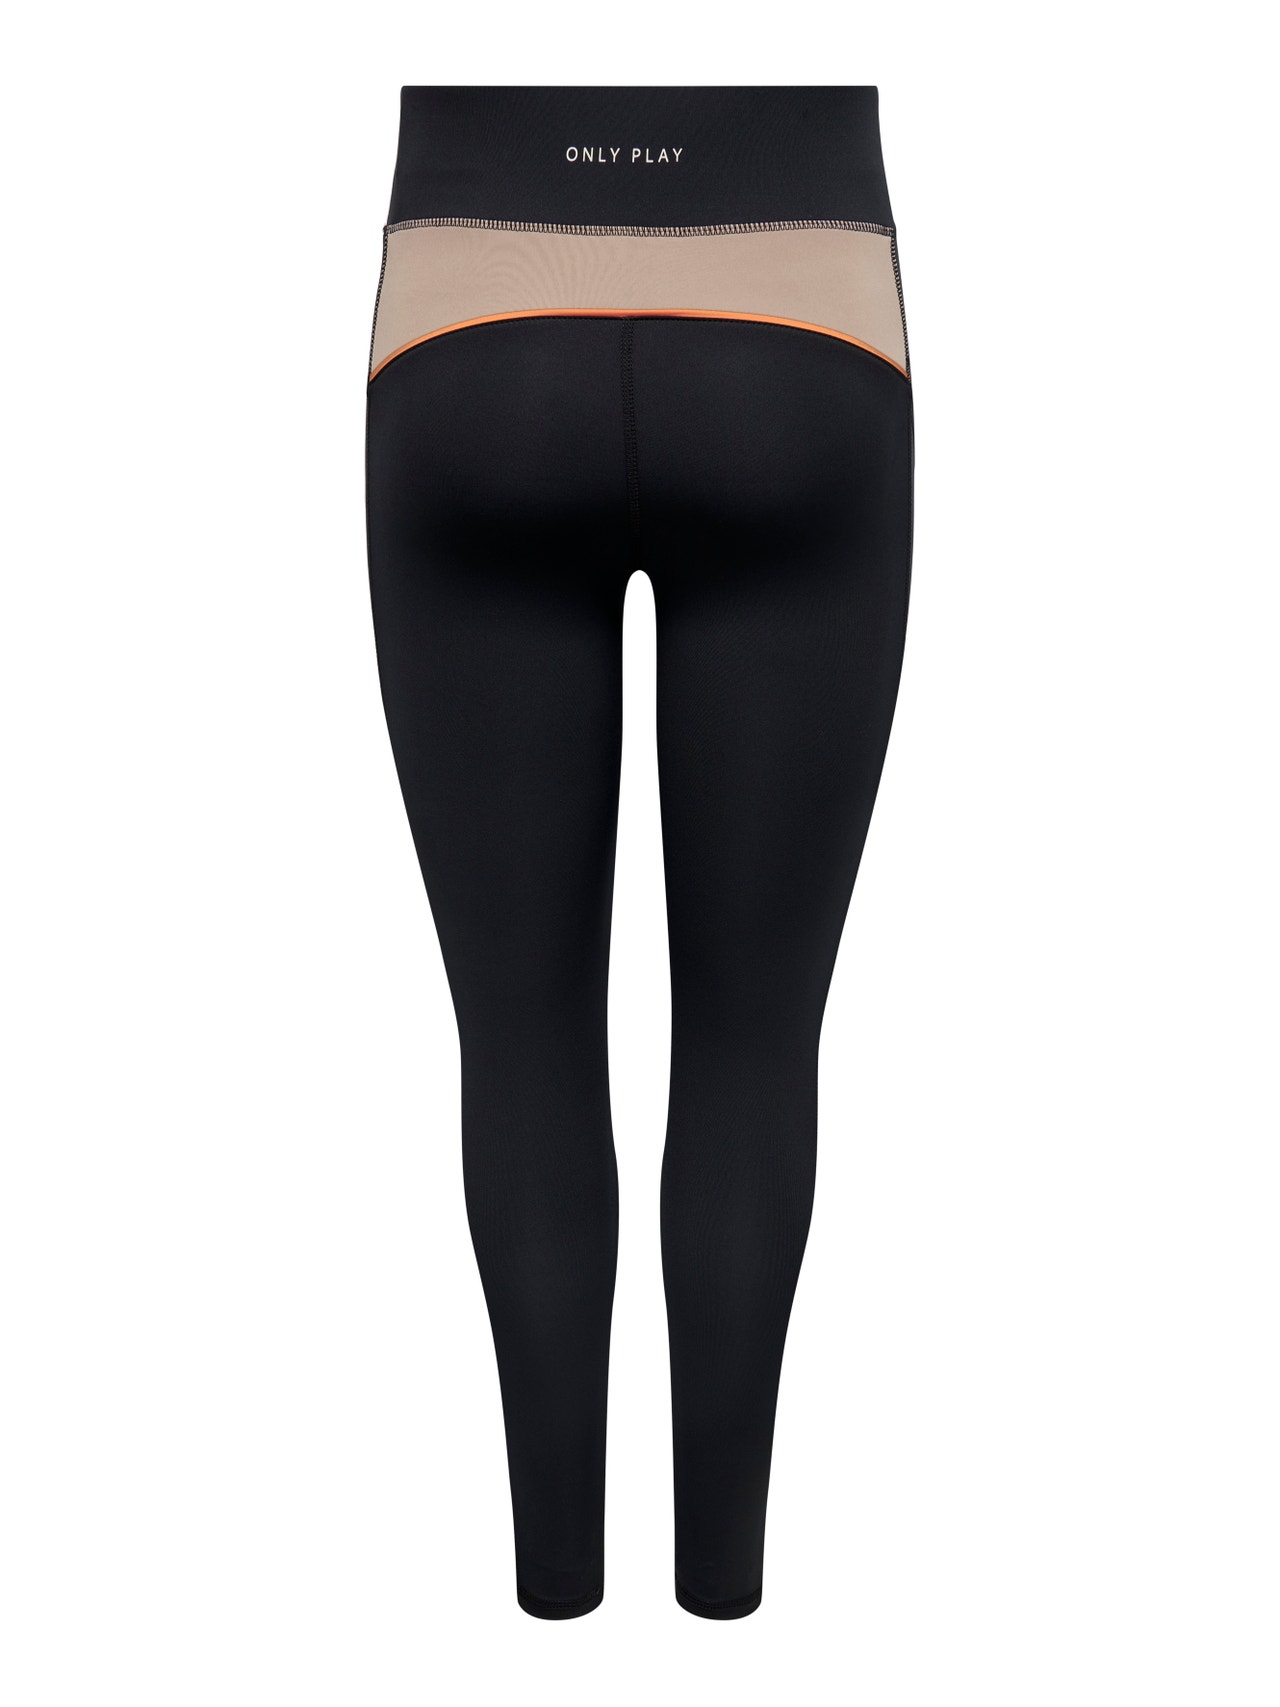 Contrast colored Training Tights with 40% discount!